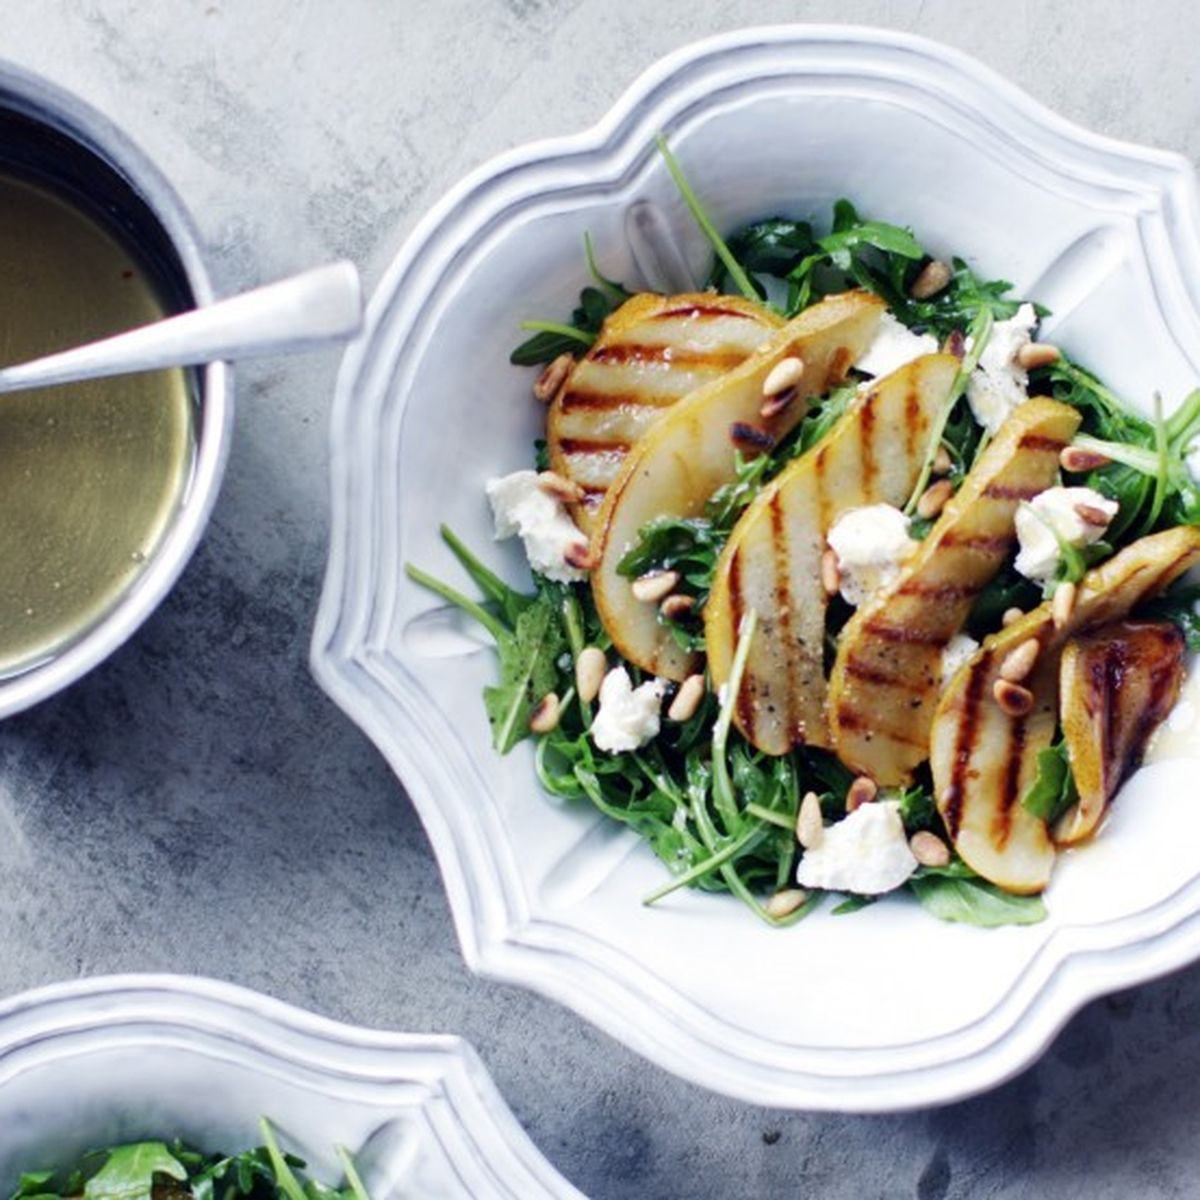 Grilled Pear Salad With Arugula And Goat Cheese Recipe On Food52,What Do Cats Like In Minecraft